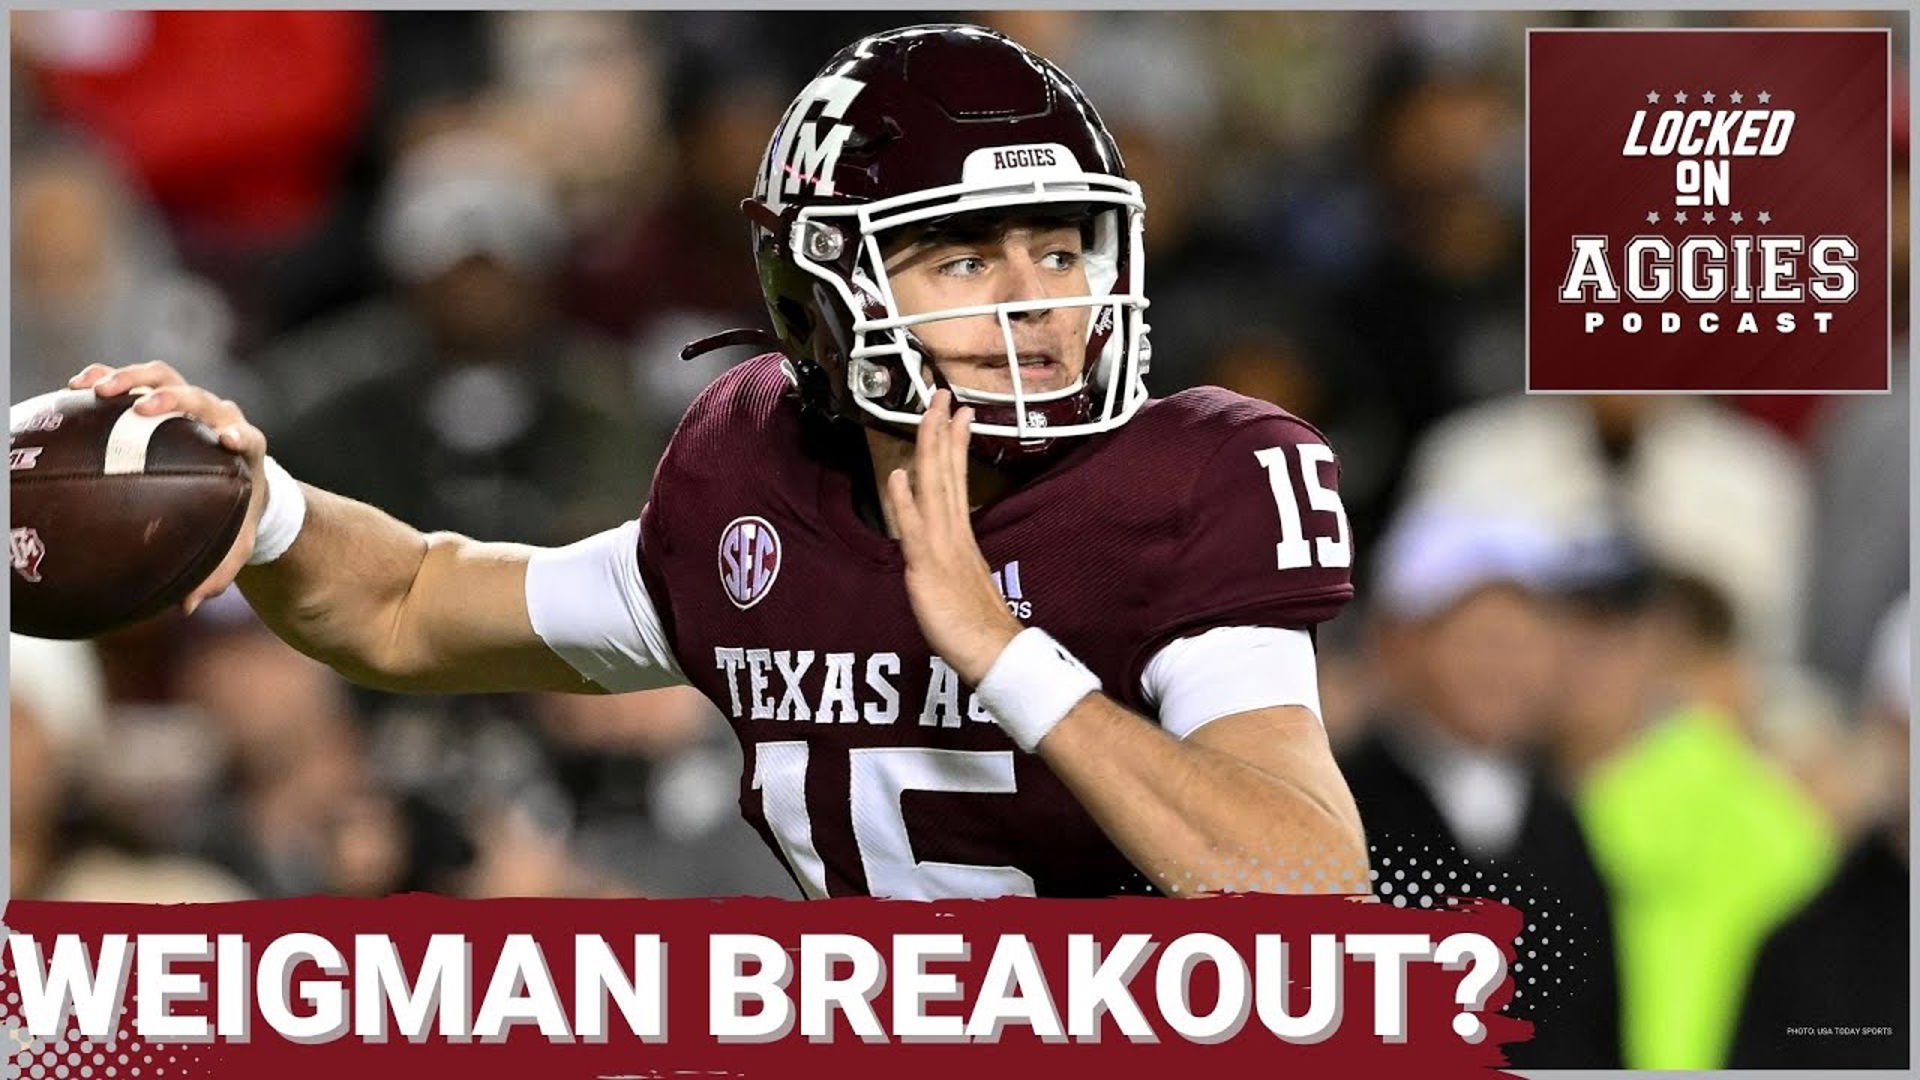 On today's episode of Locked On Aggies, host Andrew Stefaniak talks about how an NFL GM said that he believes Conner Weigman is going to have a breakout season